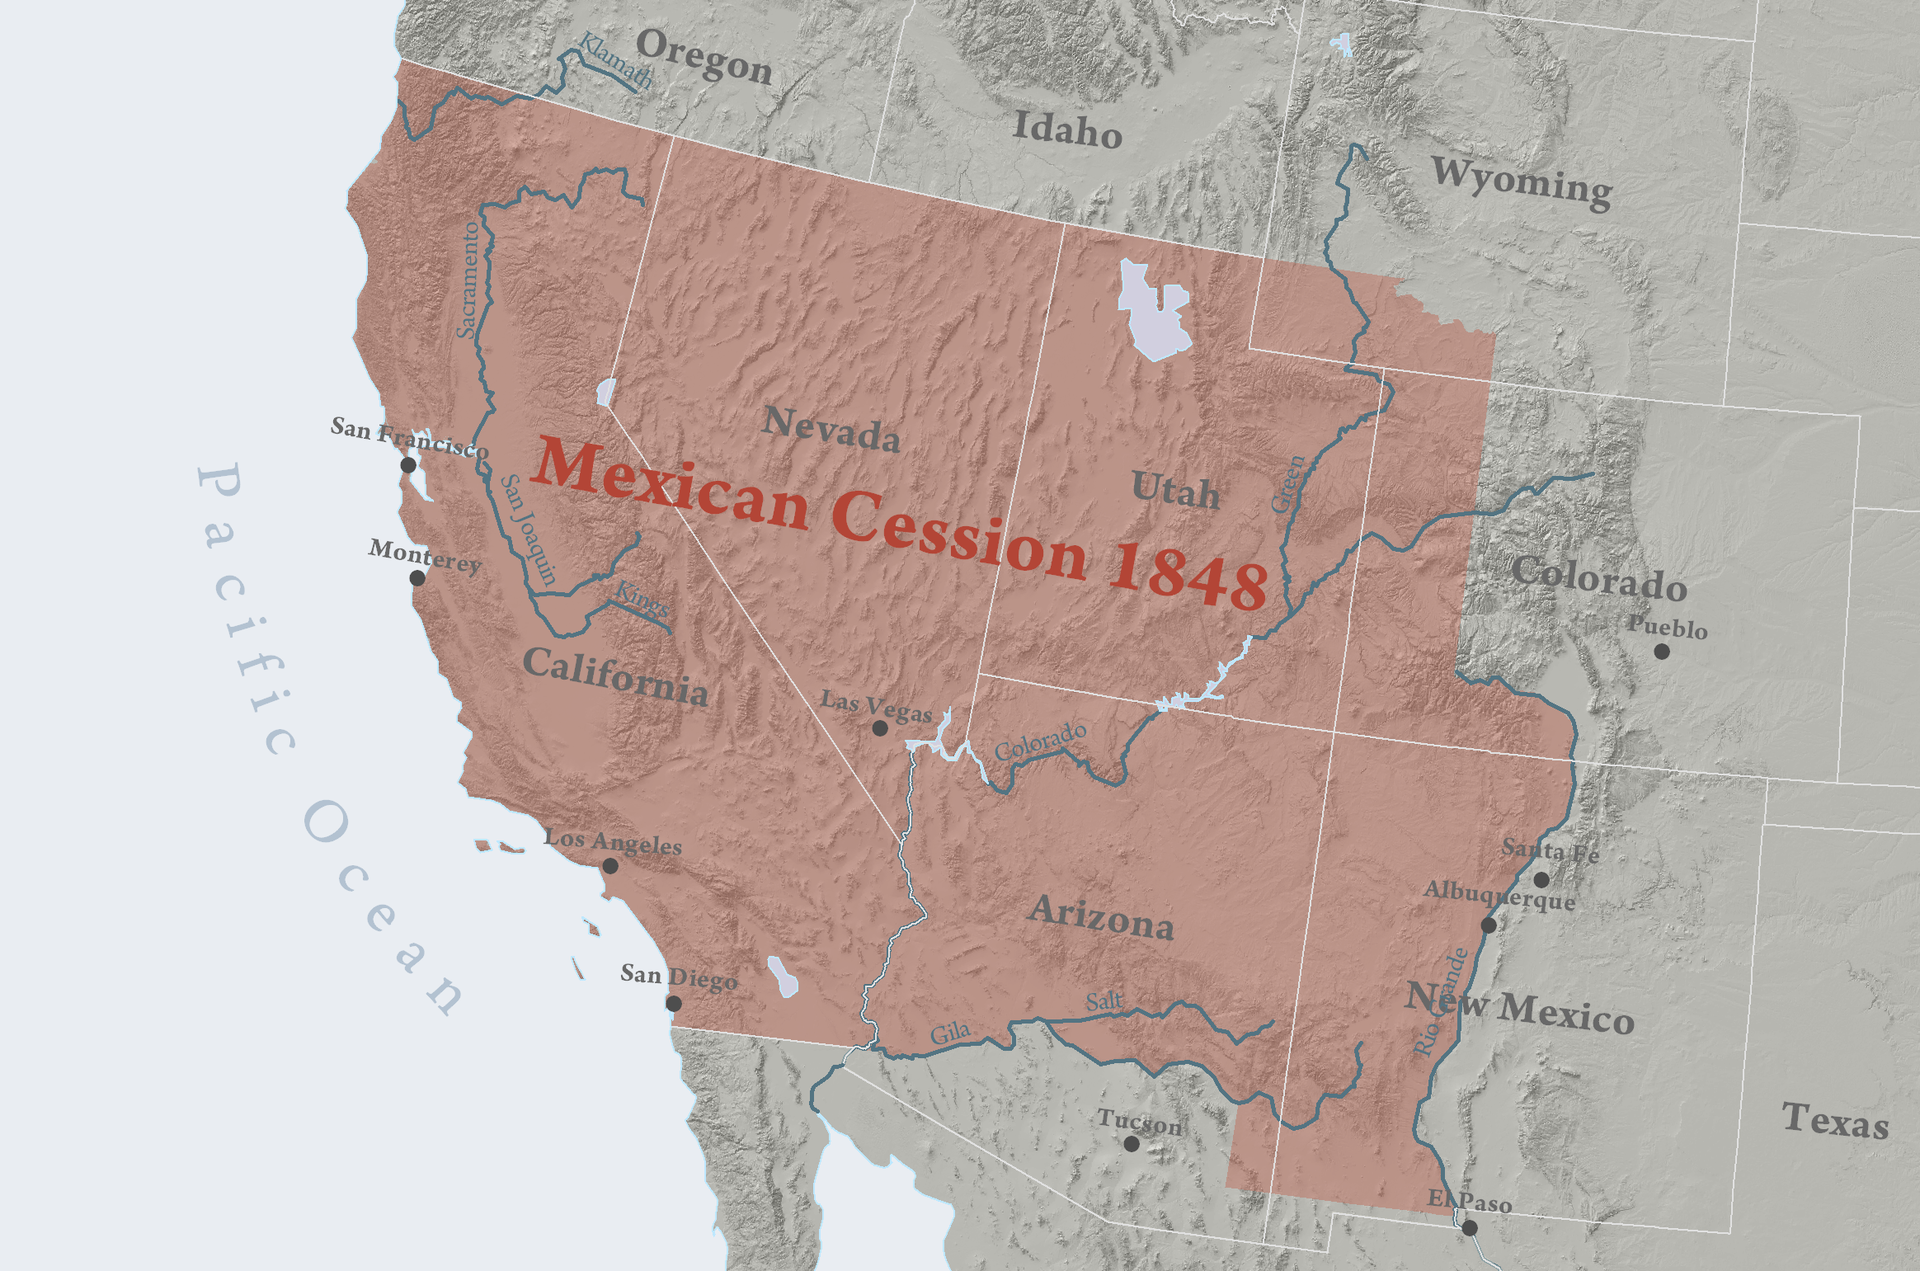 Here is a map of the Mexican Cession (1848), highlighting all of the present-day states of California, Nevada and Utah, and parts of the present-day states of Colorado, Arizona and New Mexico.